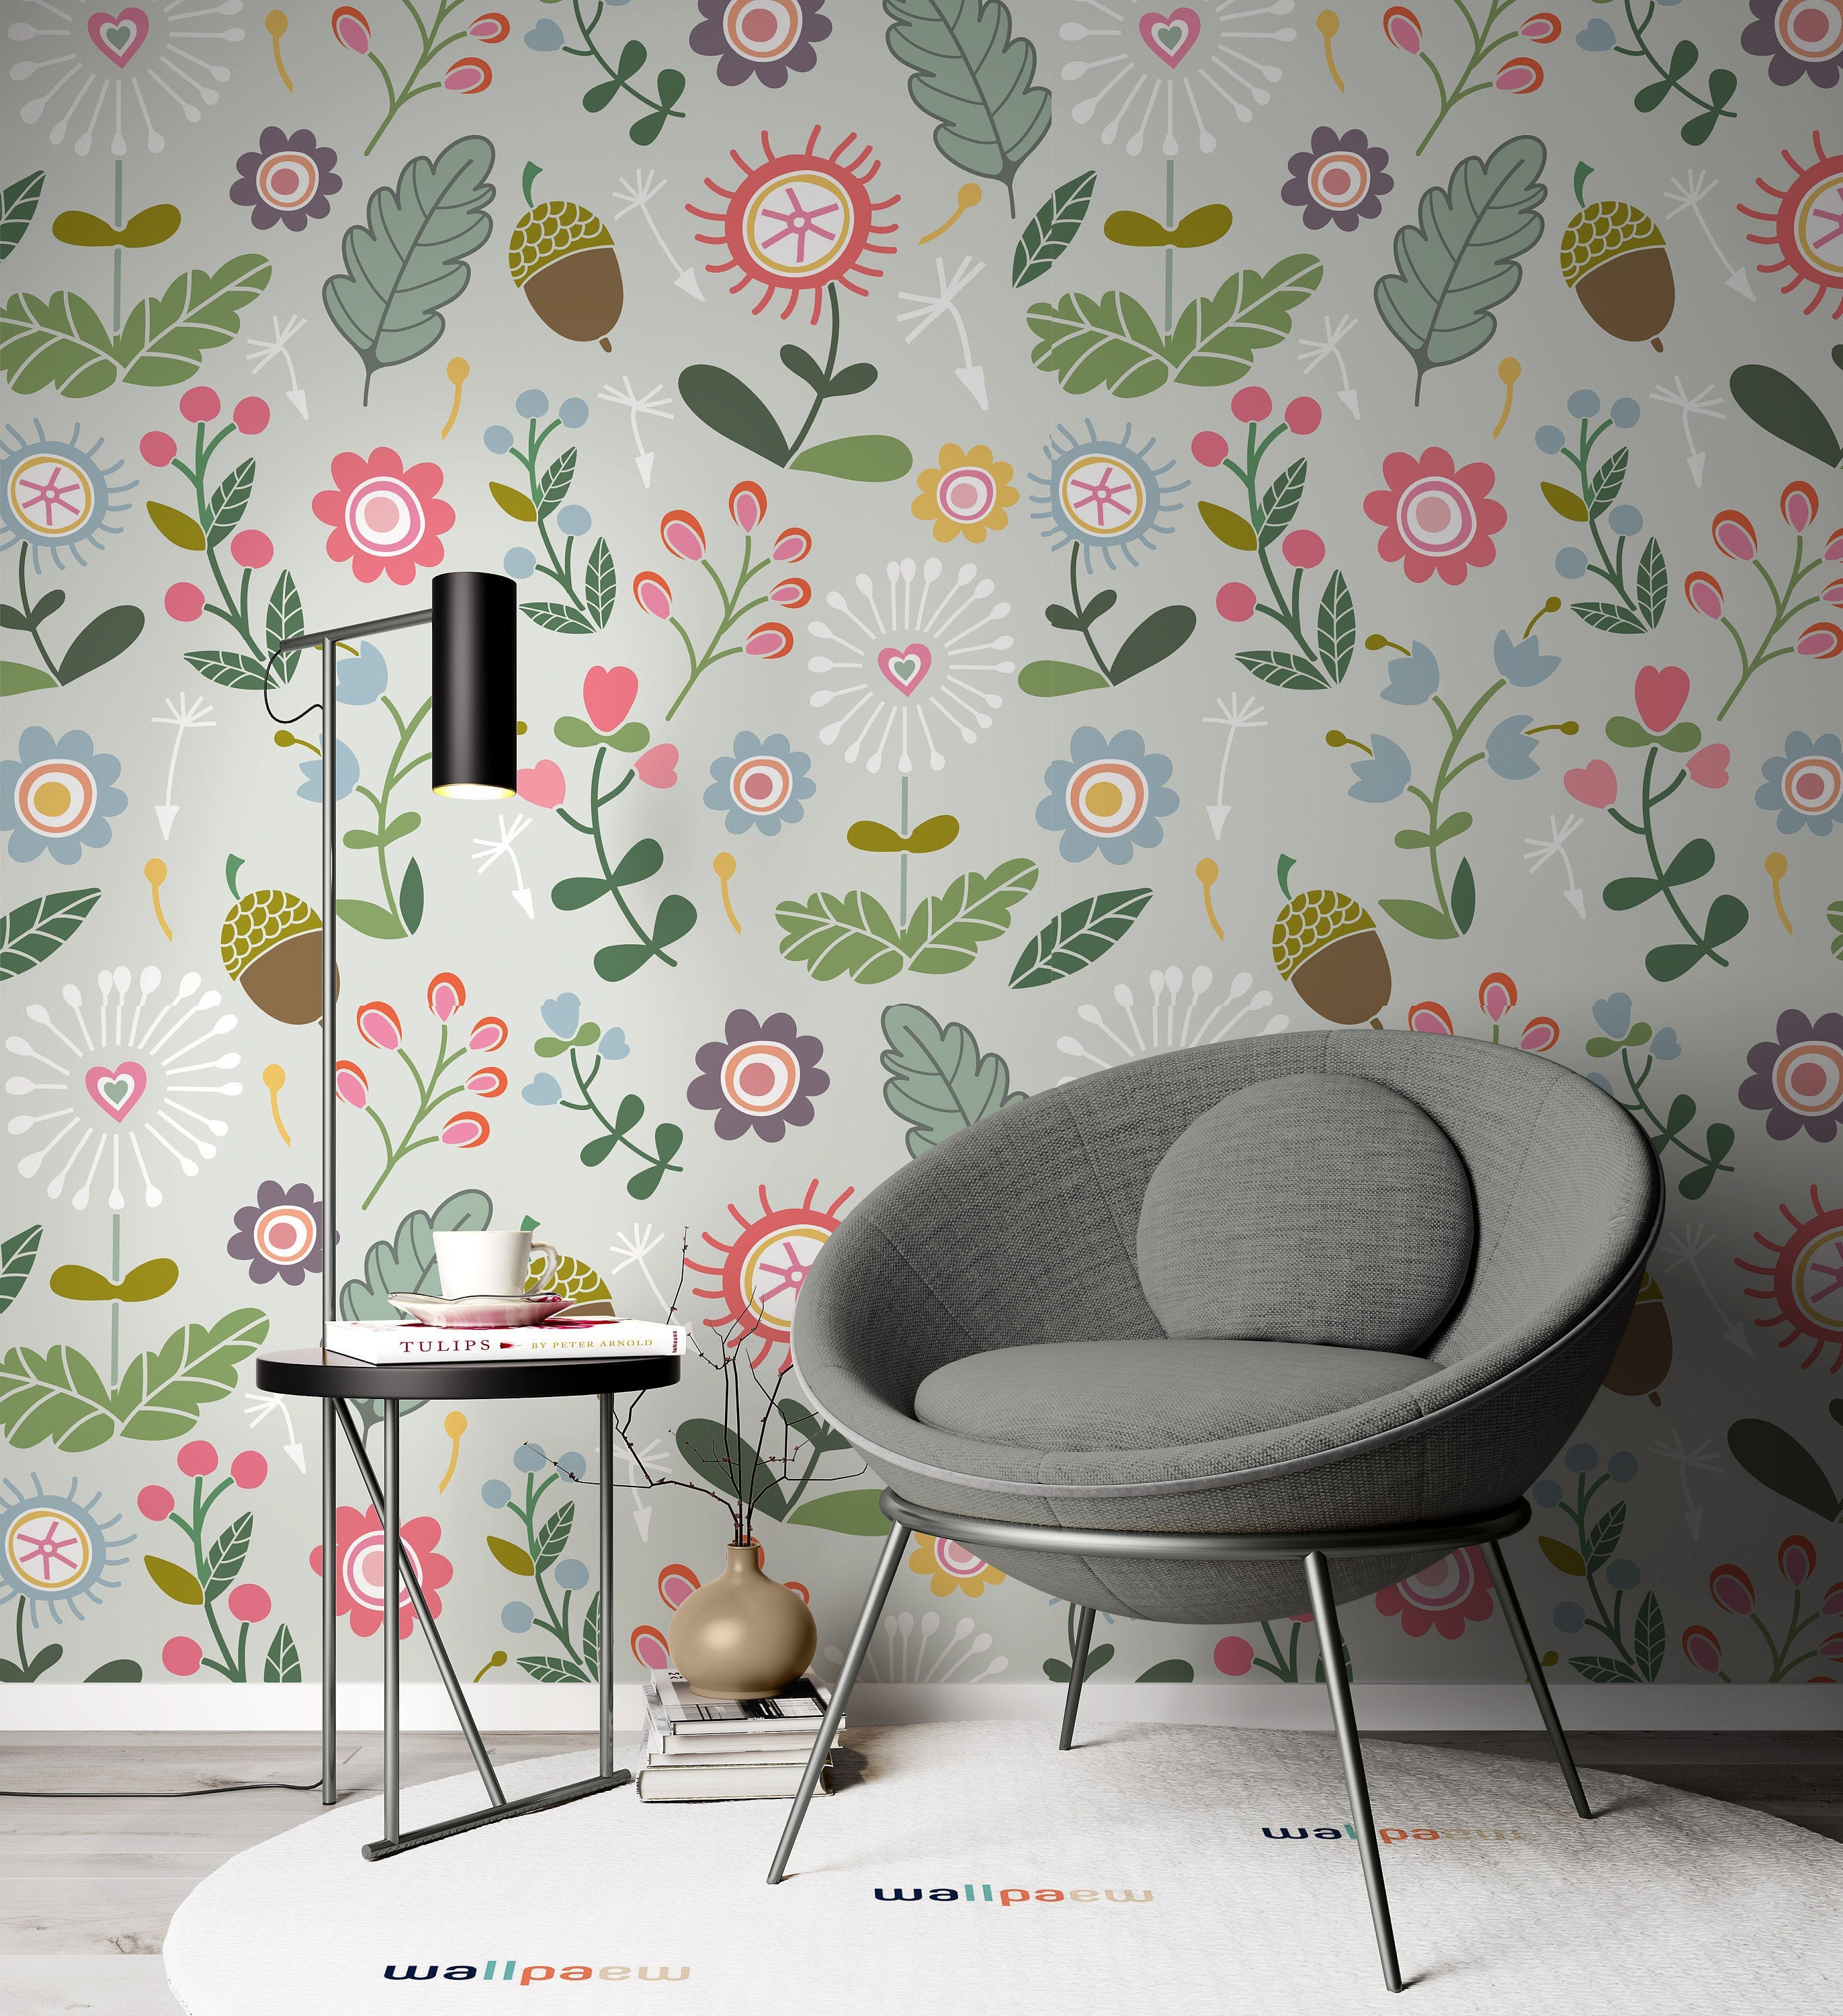 Hazelnut Colorful Flowers Leaves Water Green On The Background Wallpaper Restaurant Living Room Cafe Office Bedroom Mural Home Wall Art